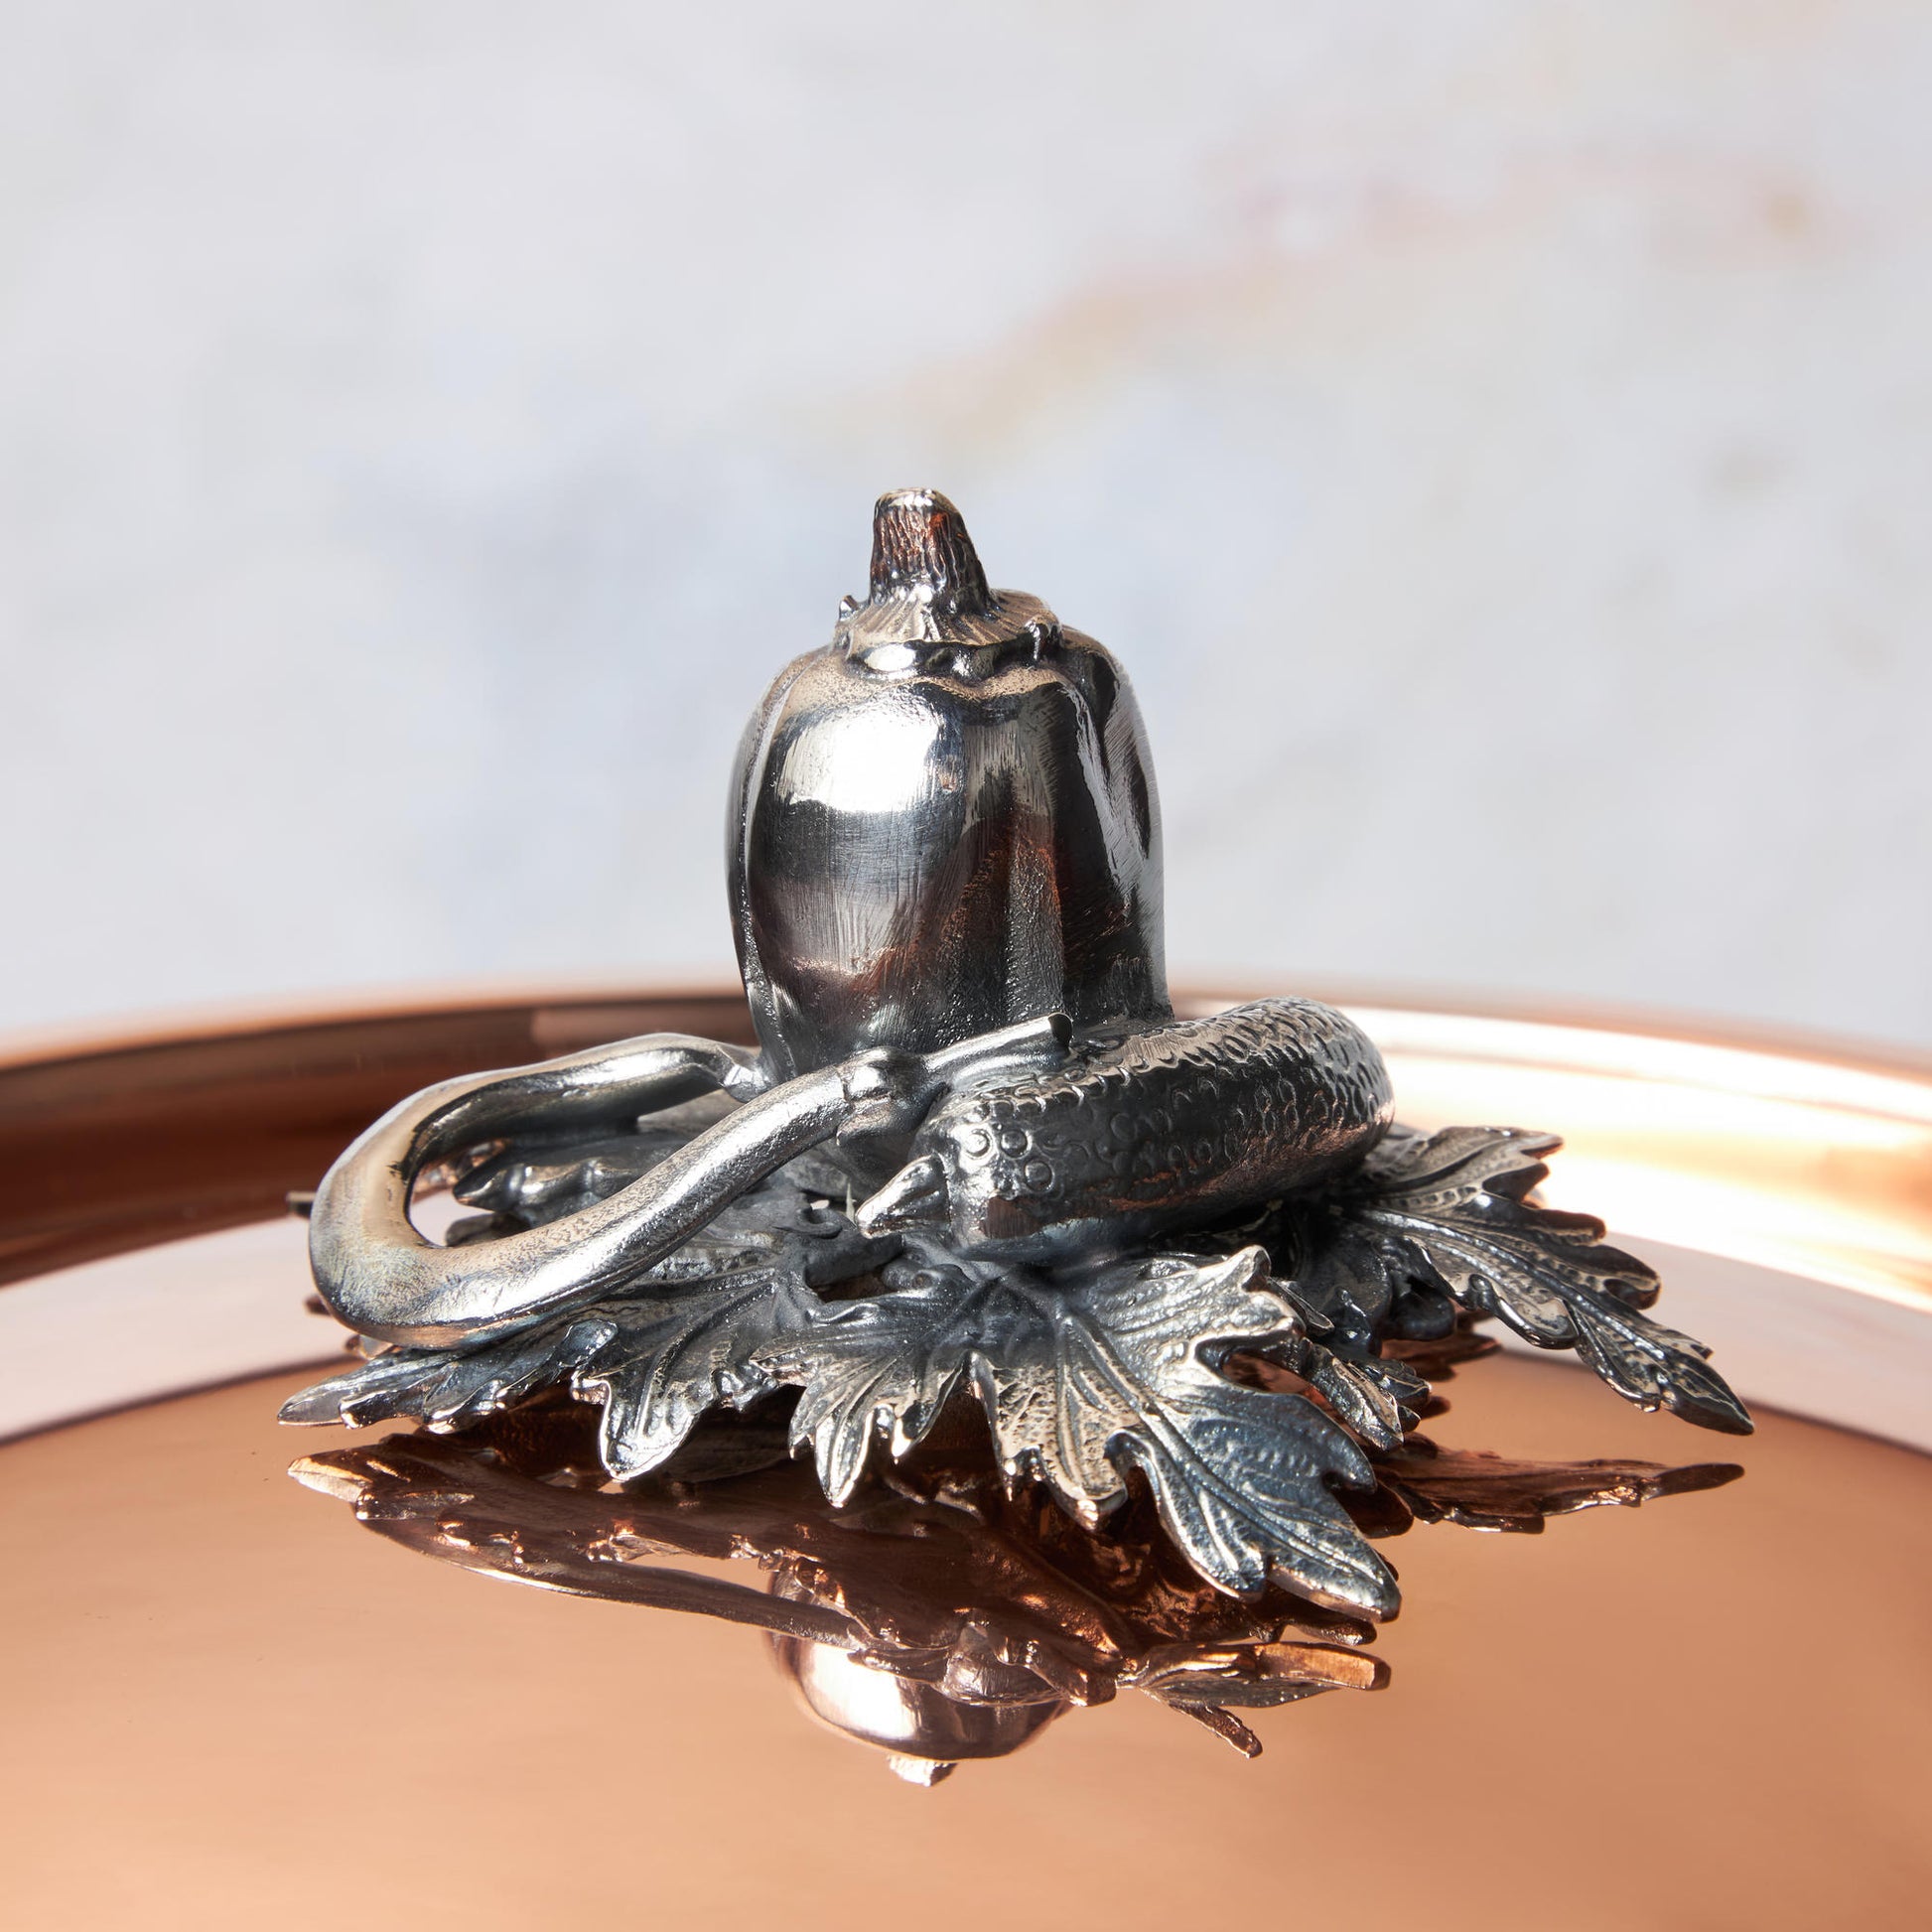 Decorated knob finial representing pepper, cucumber and string bean, cast in solid bronze and silver plated, on Opus Cupra clad copper lid by Ruffoni